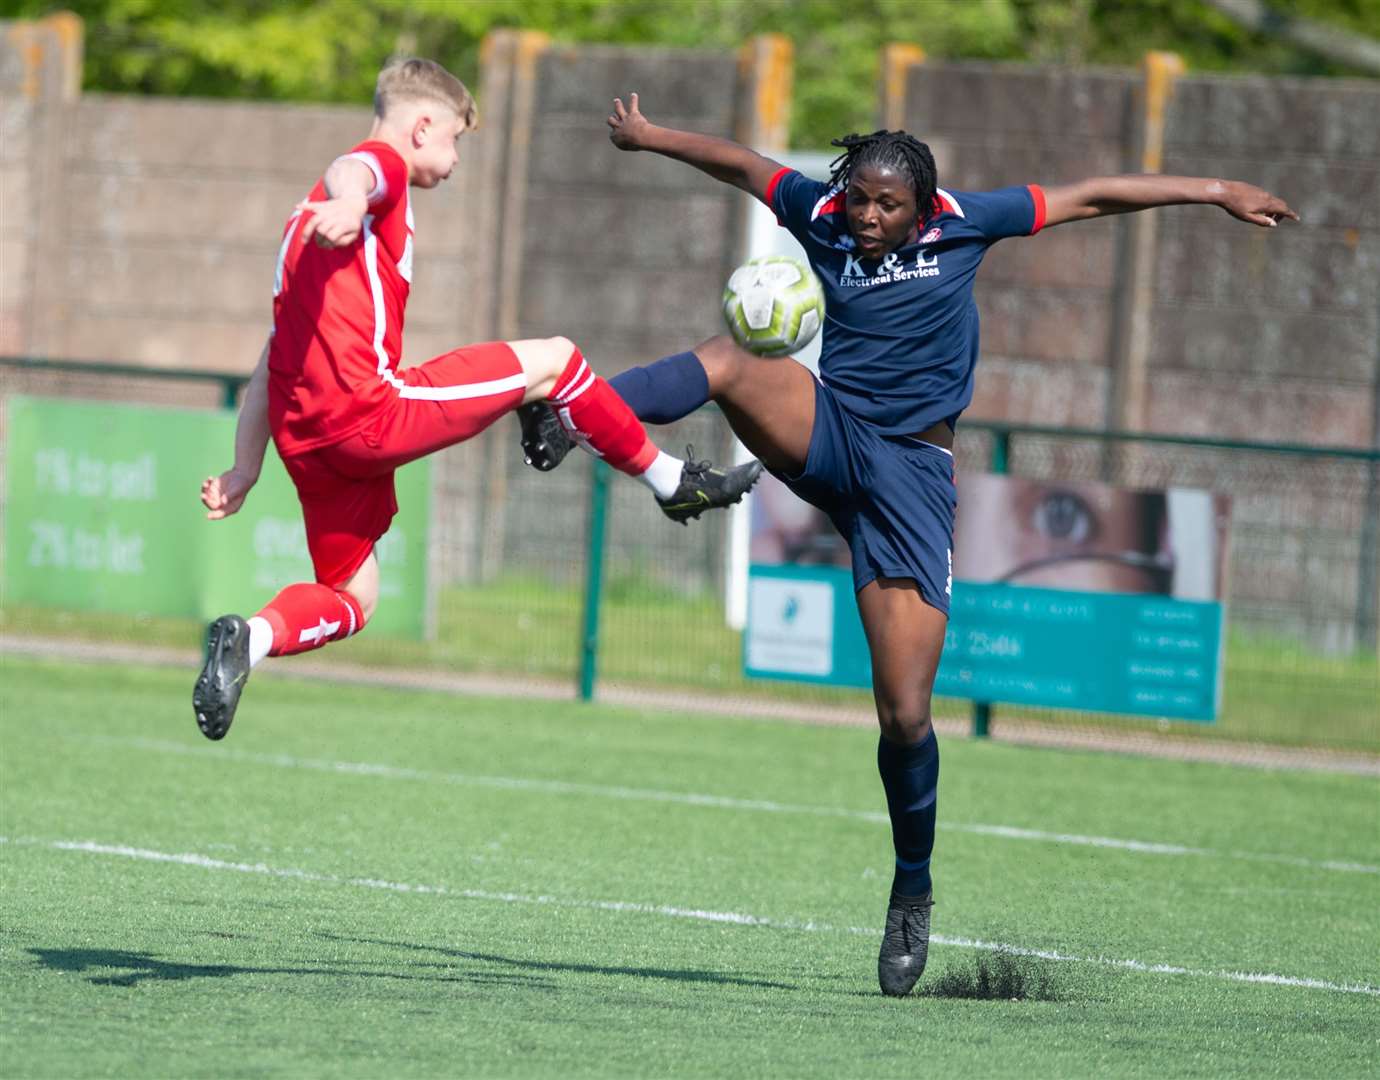 Whitstable Town under-18s (red) challenge Chatham Town under-18s. Picture: PSP Images